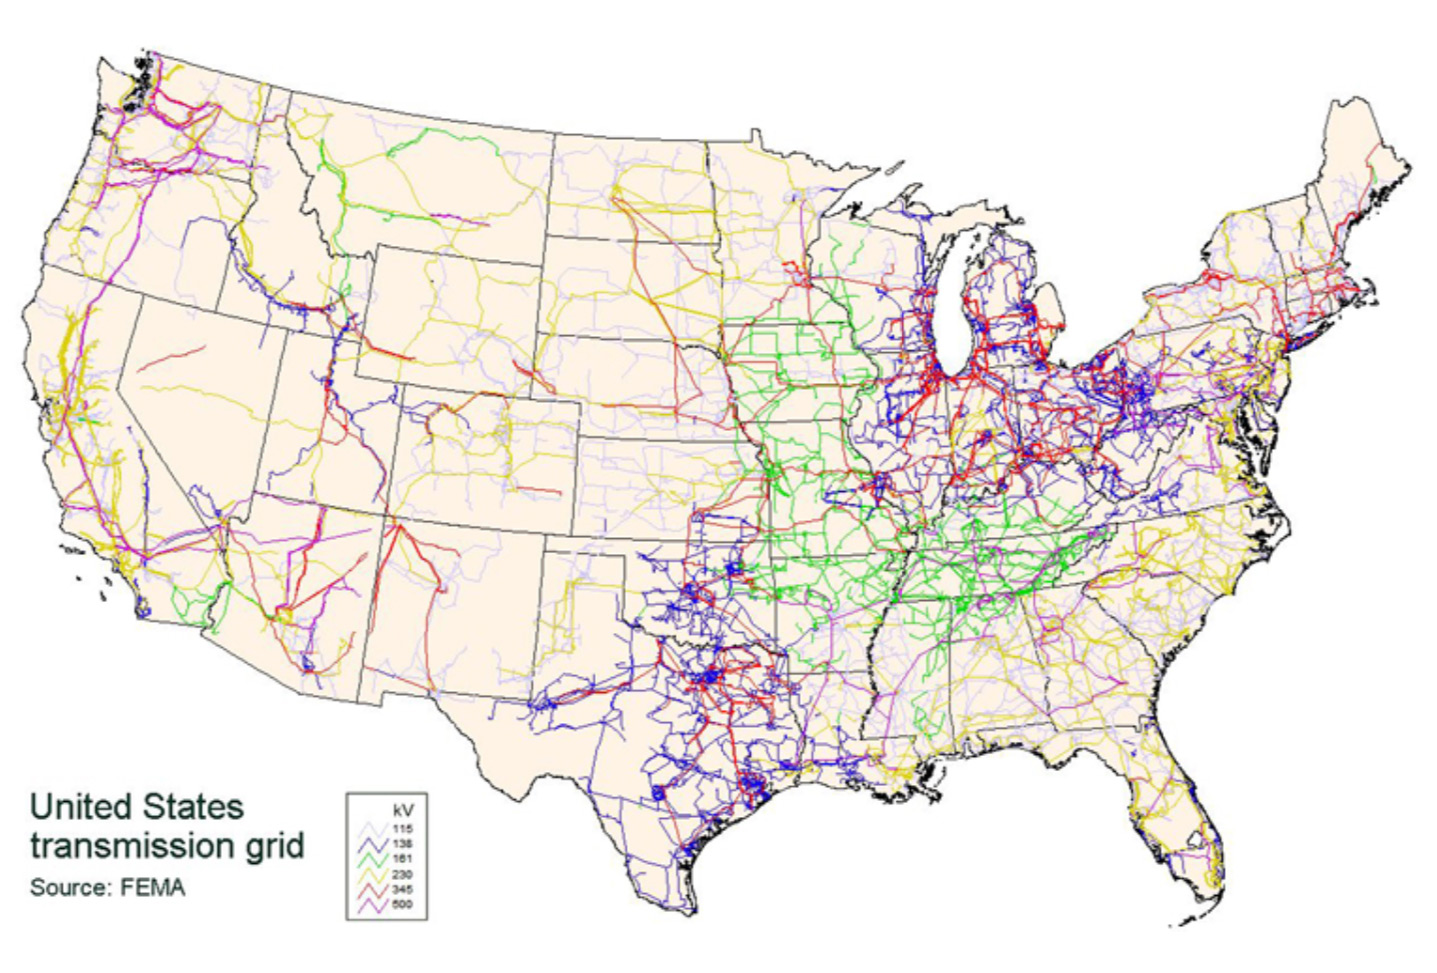 Map of power transmission lines in the United States